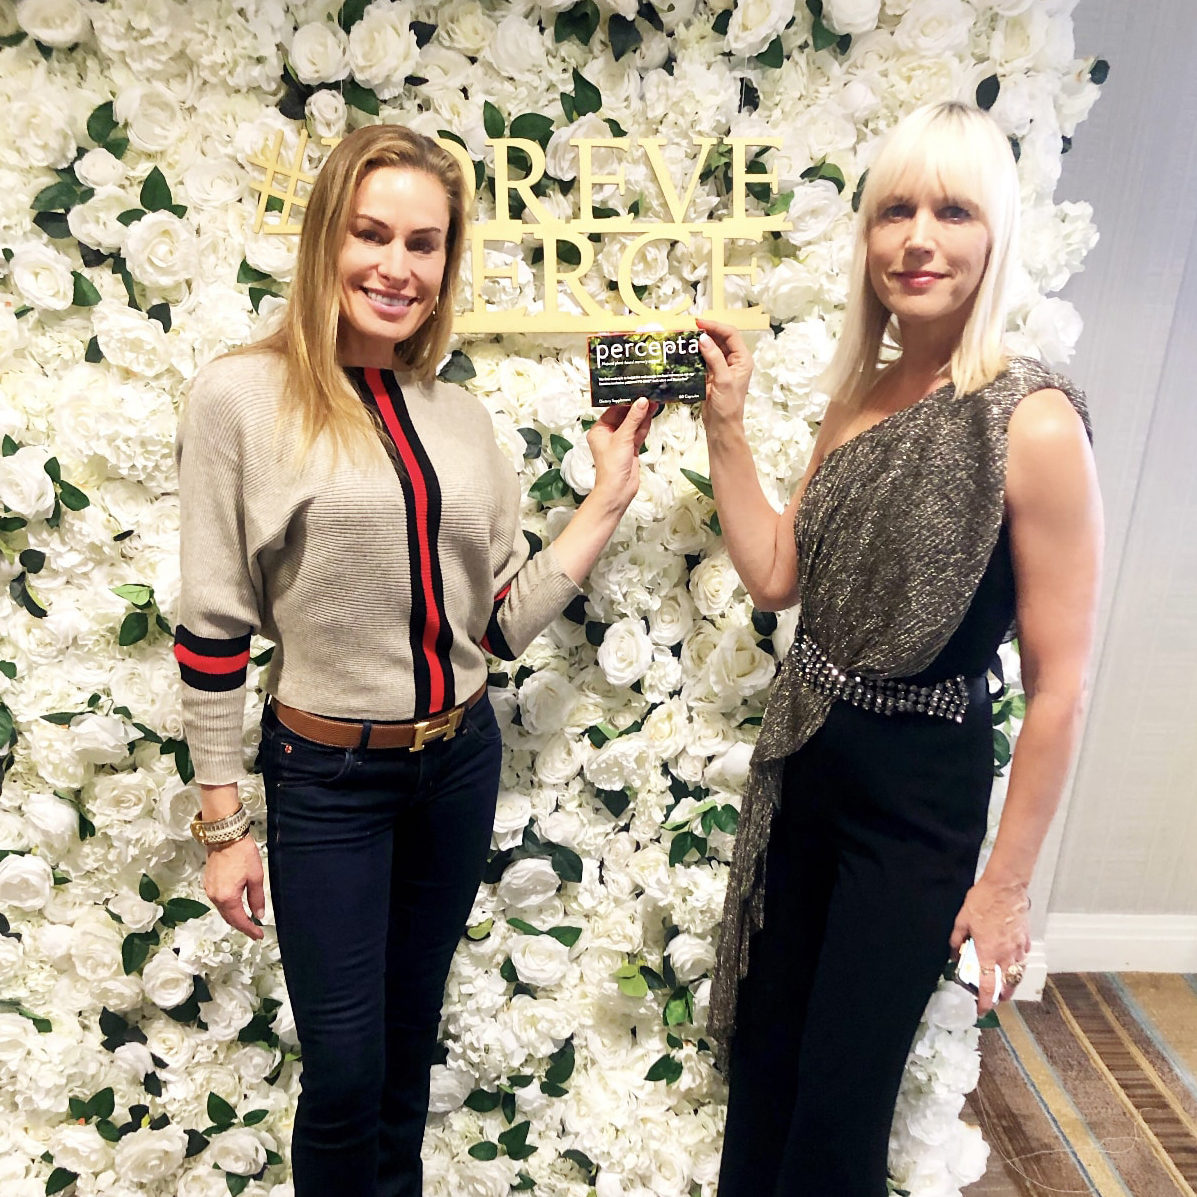 Two women influencers holding a box of percepta standing in front of white rose display